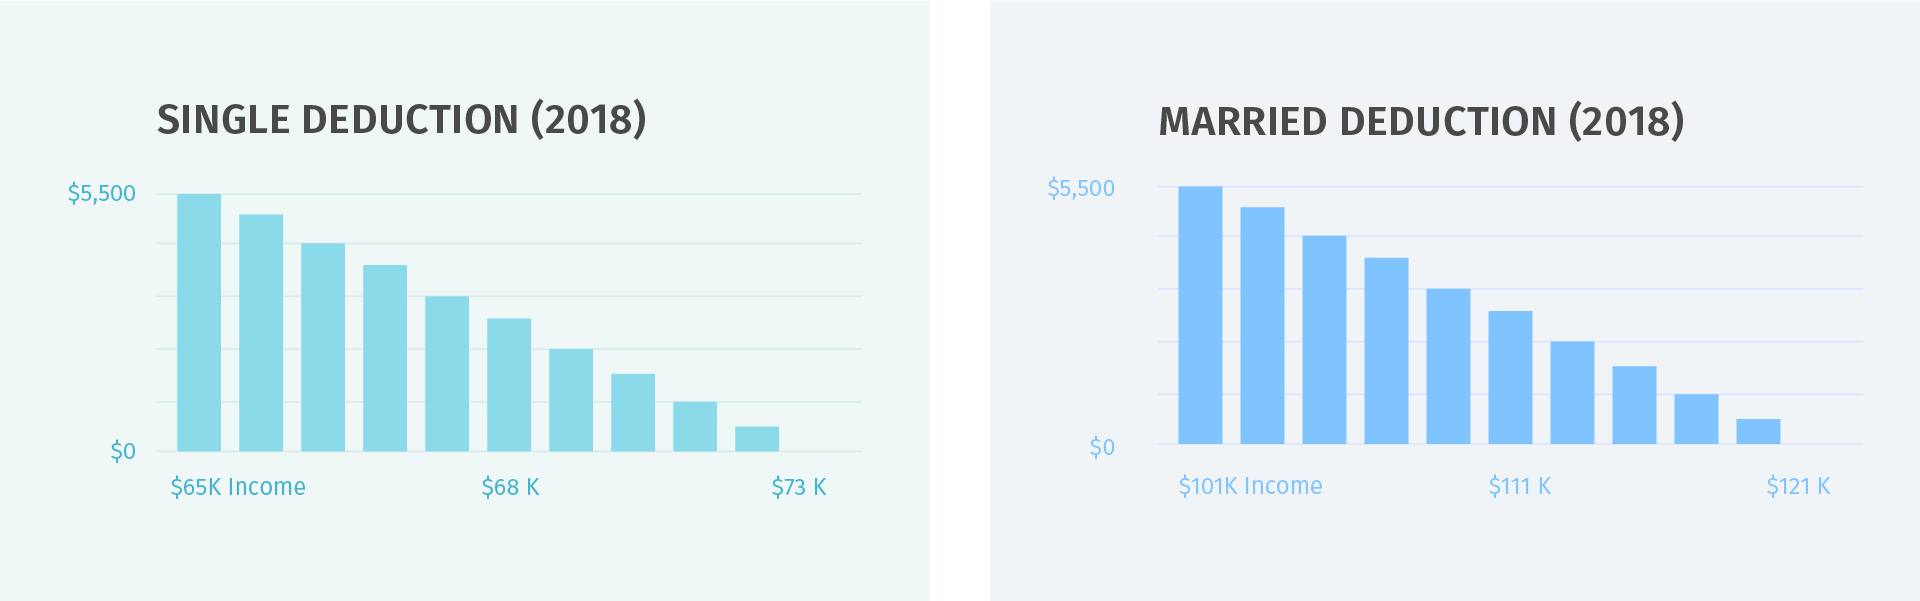 chart showing deduction for married and single